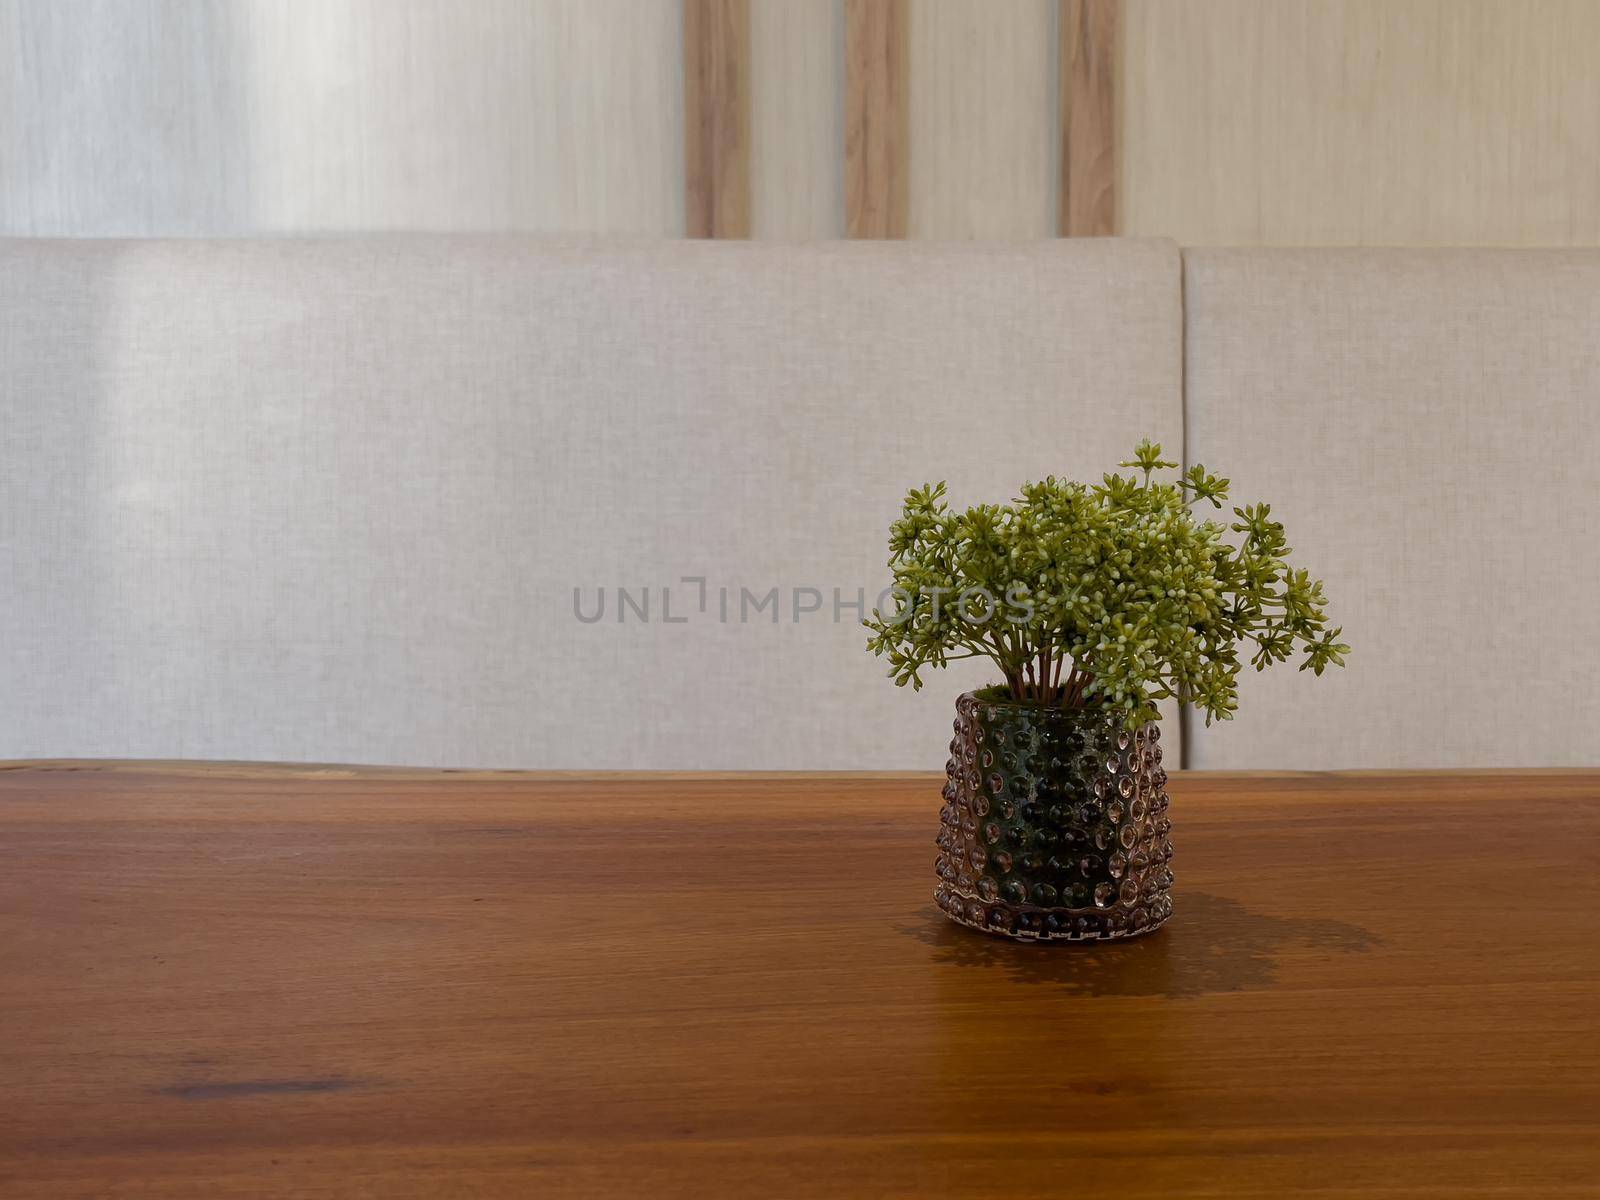 Table of free space with green plant by punsayaporn